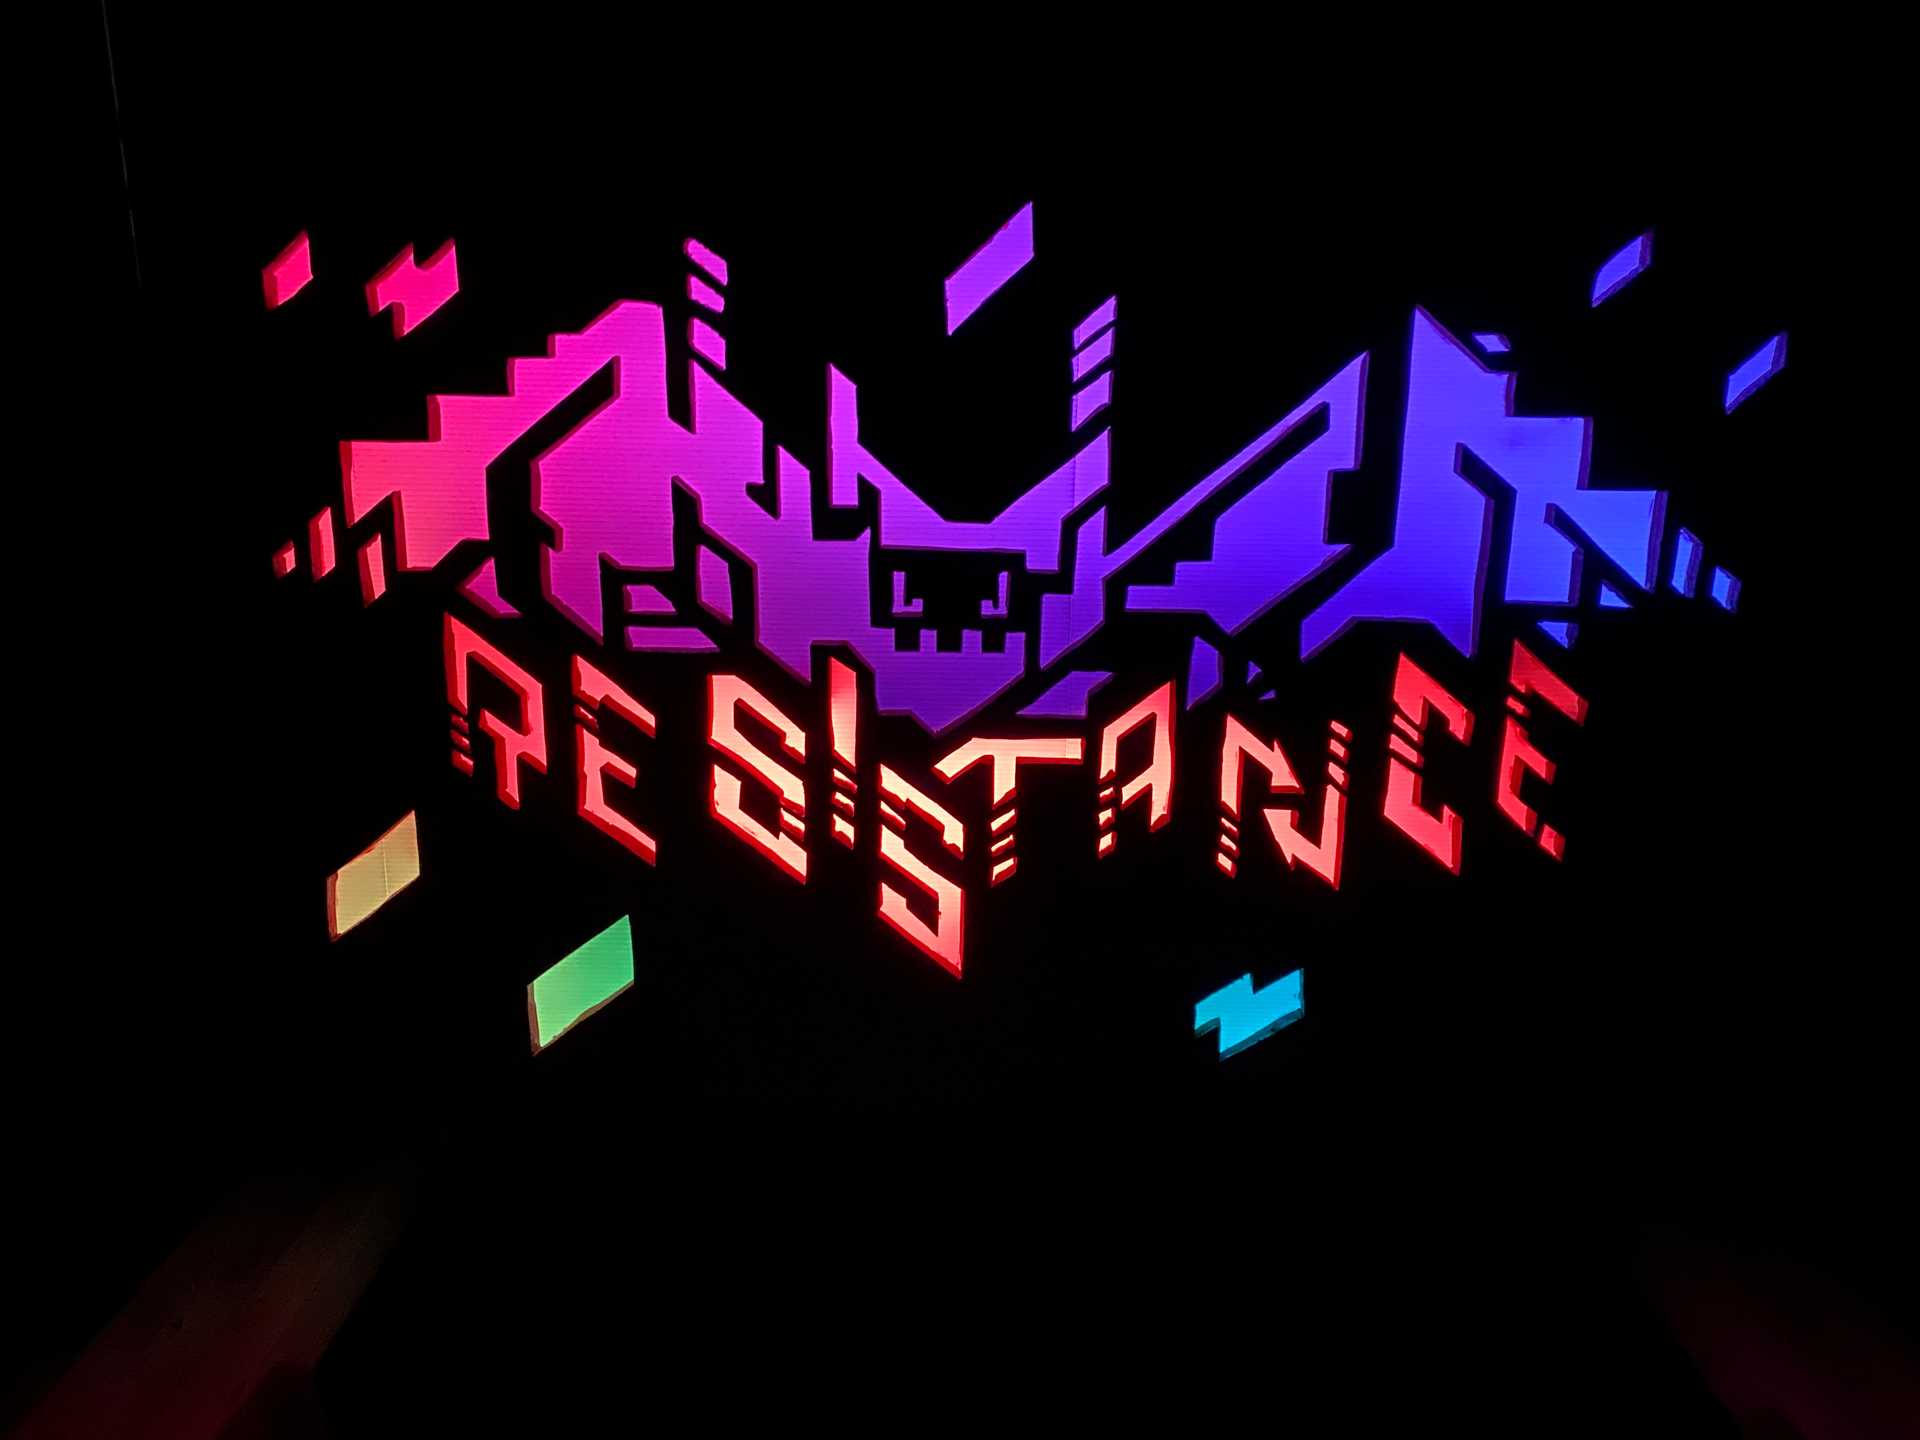 Resistance and the FLow Bats logo